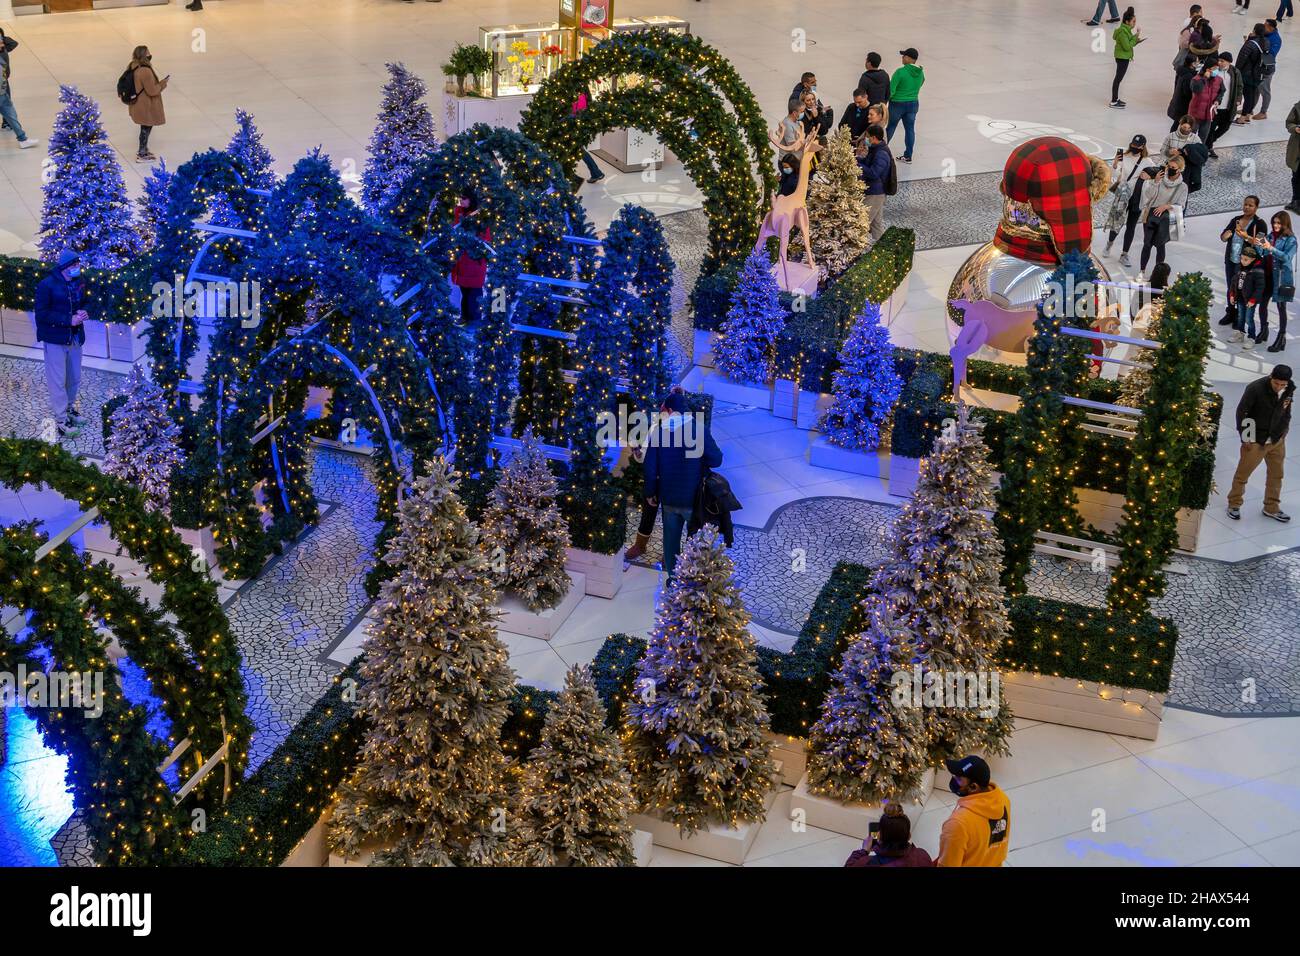 Shoppers and tourists enjoy the Christmas activation in the Holiday Market in the Westfield Mall in the Oculus in the World Trade Center Transportation Hub in Lower Manhattan in New York on Sunday, December 5, 2021.  (© Richard B. Levine) Stock Photo